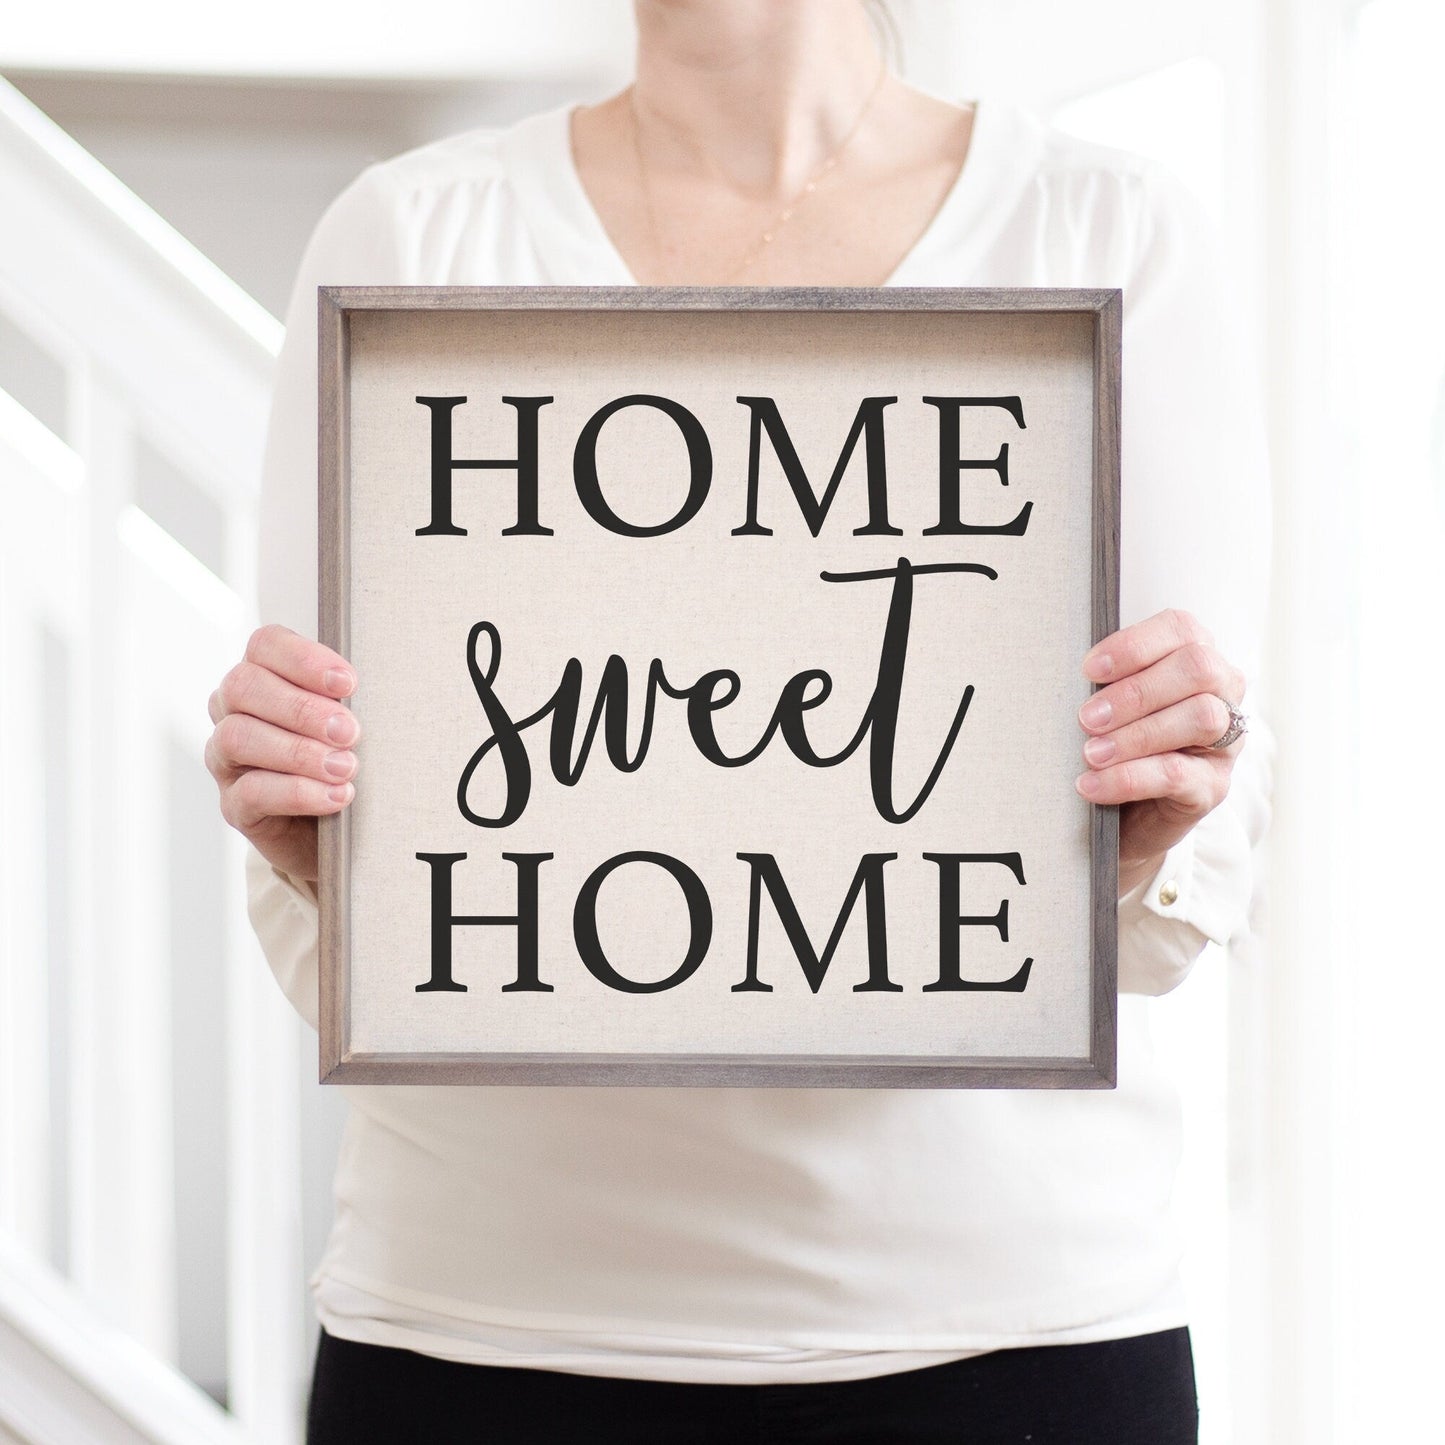 Home Sweet Home Sign | Rustic Decor | Home Decor | Decorative Wall Decor | Weathered Sign | Personalized Sign | Housewarming Gift | Signs